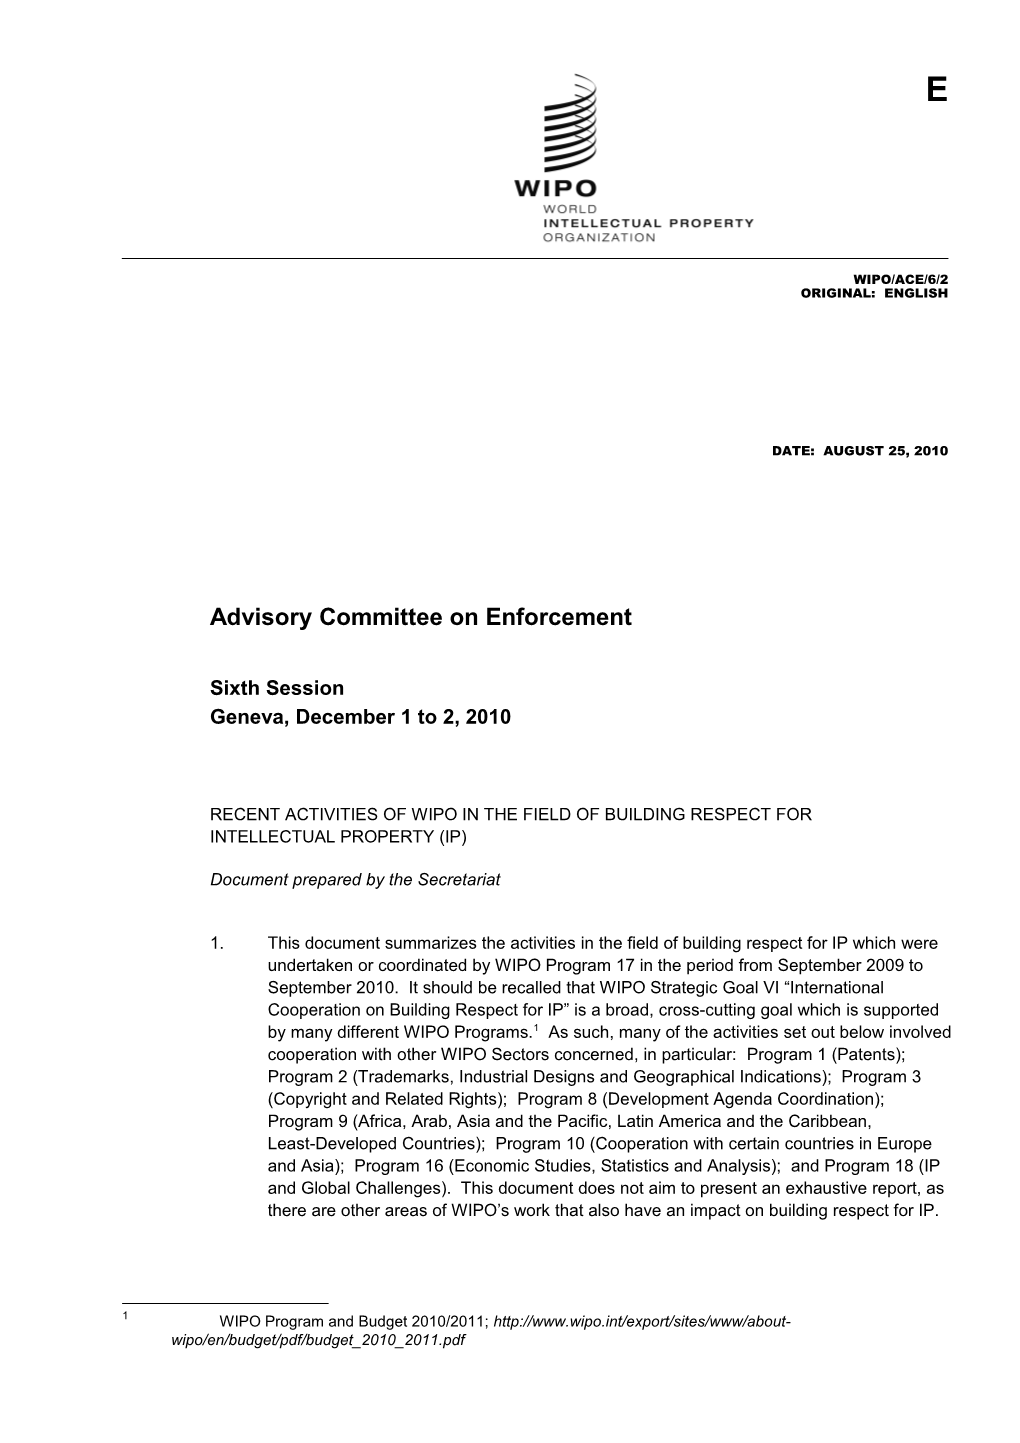 Advisory Committee on Enforcement